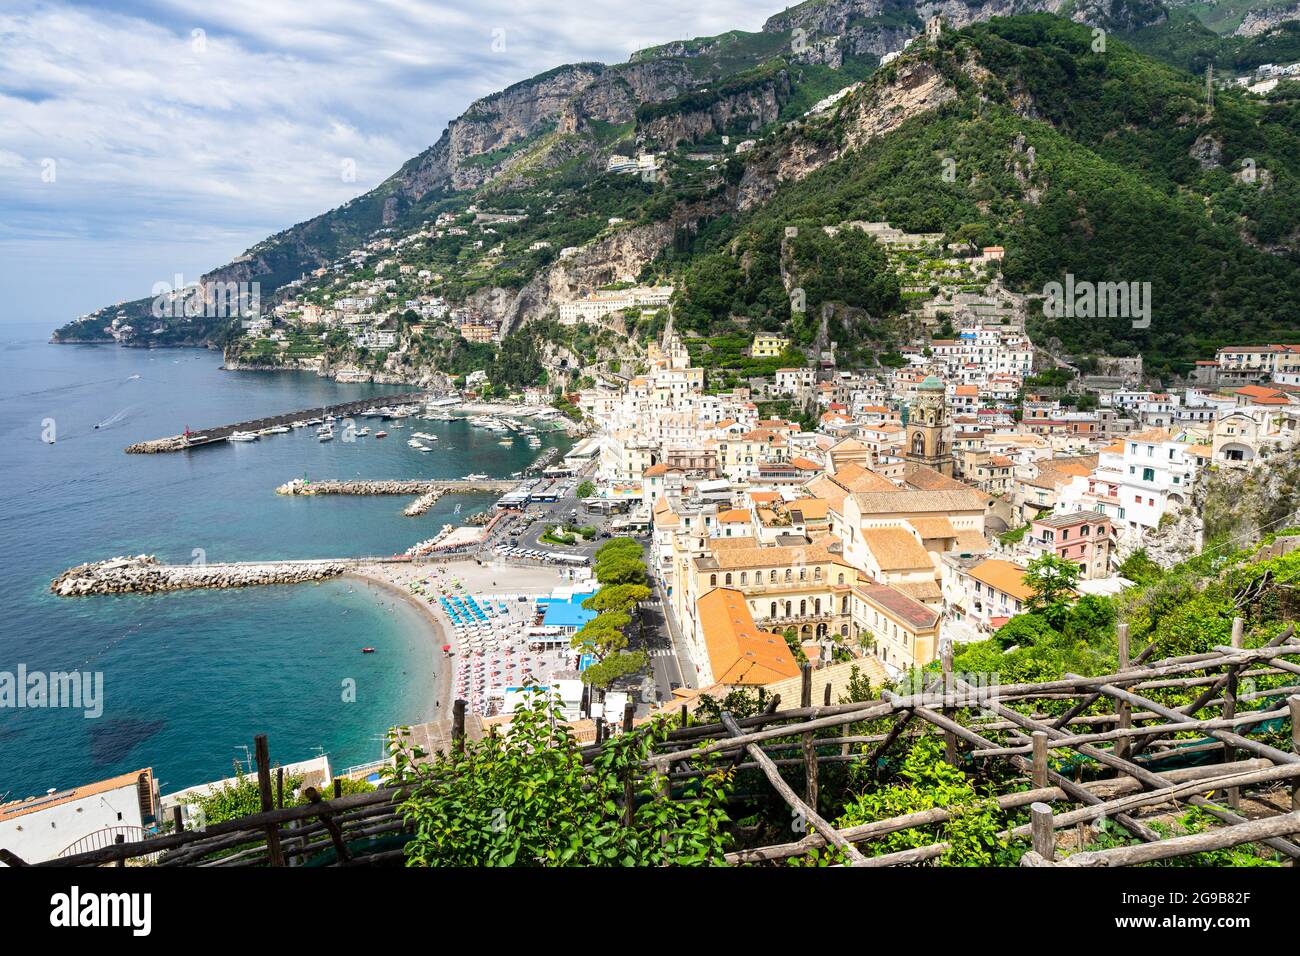 Scenic aerial view of Amalfi, the most famous and charming town of the Amalfi Coast, Italy Stock Photo